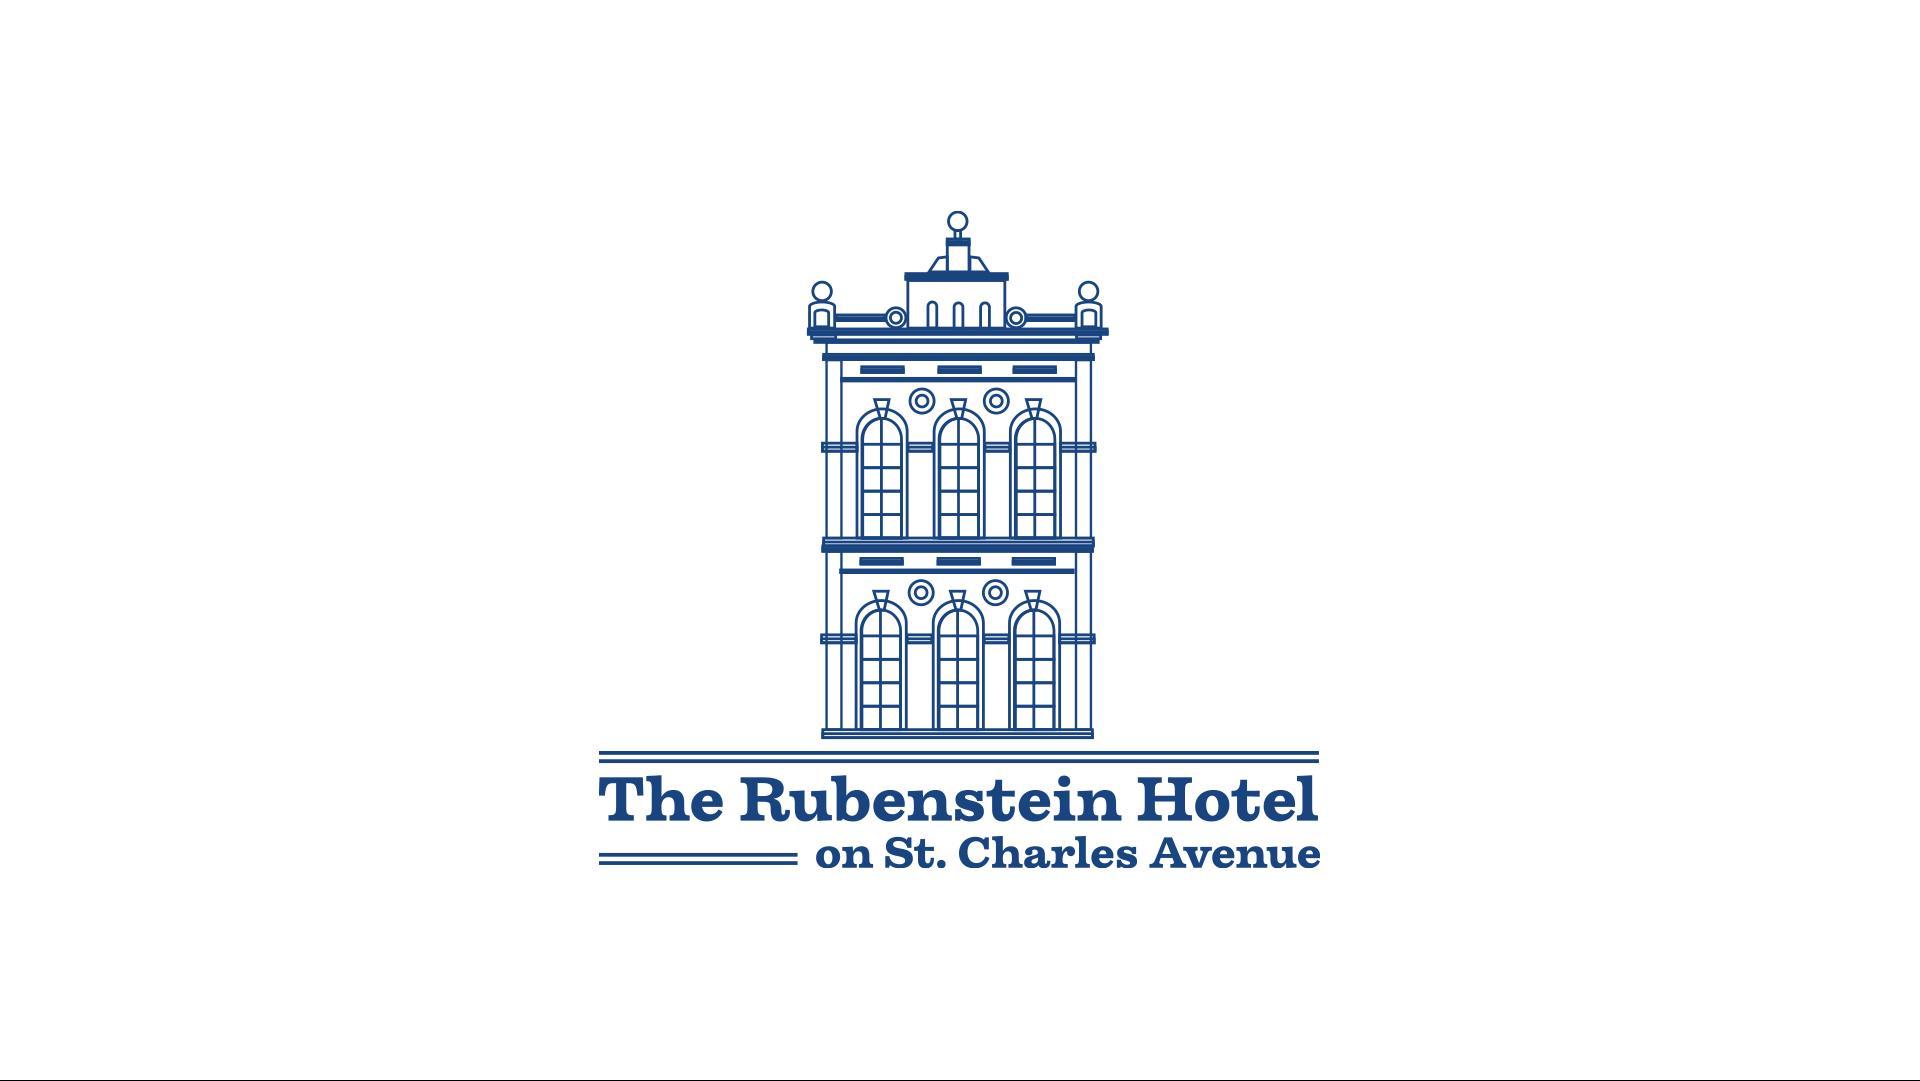 The Rubenstein Hotel on St. Charles Avenue in New Orleans, LA